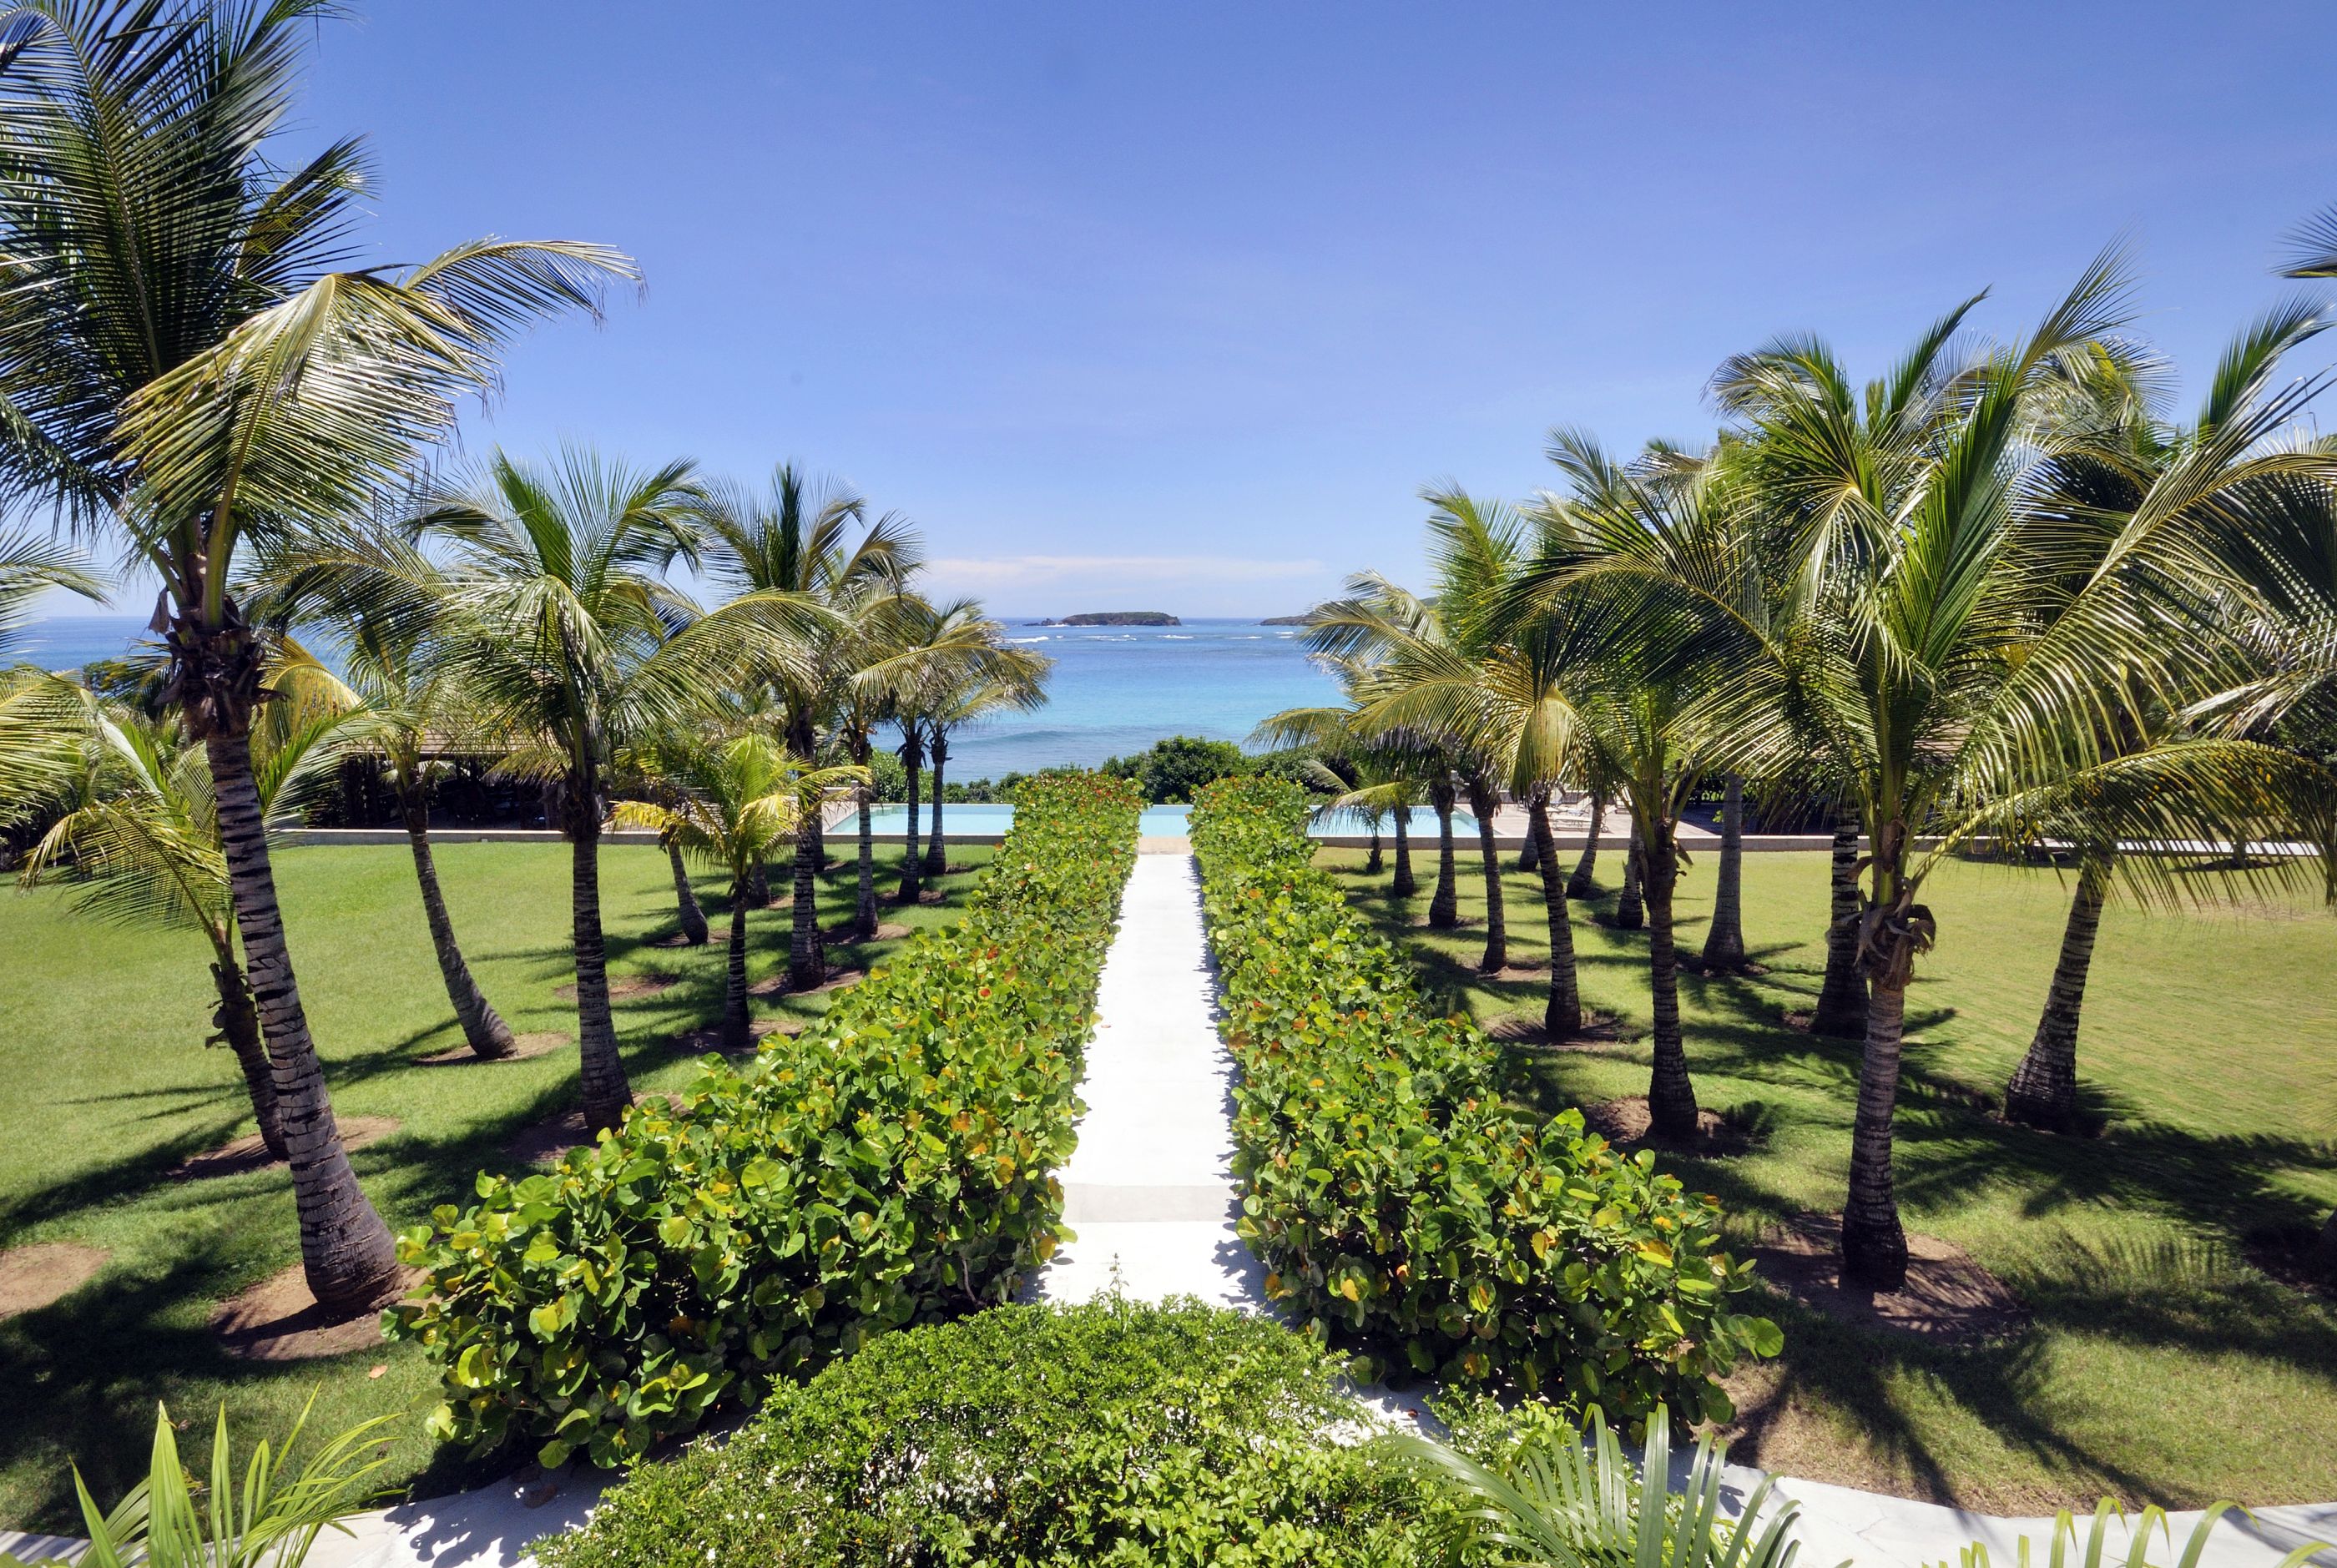 Gardens and pathway leading to the beach near Sleeping Dragon, Mustique